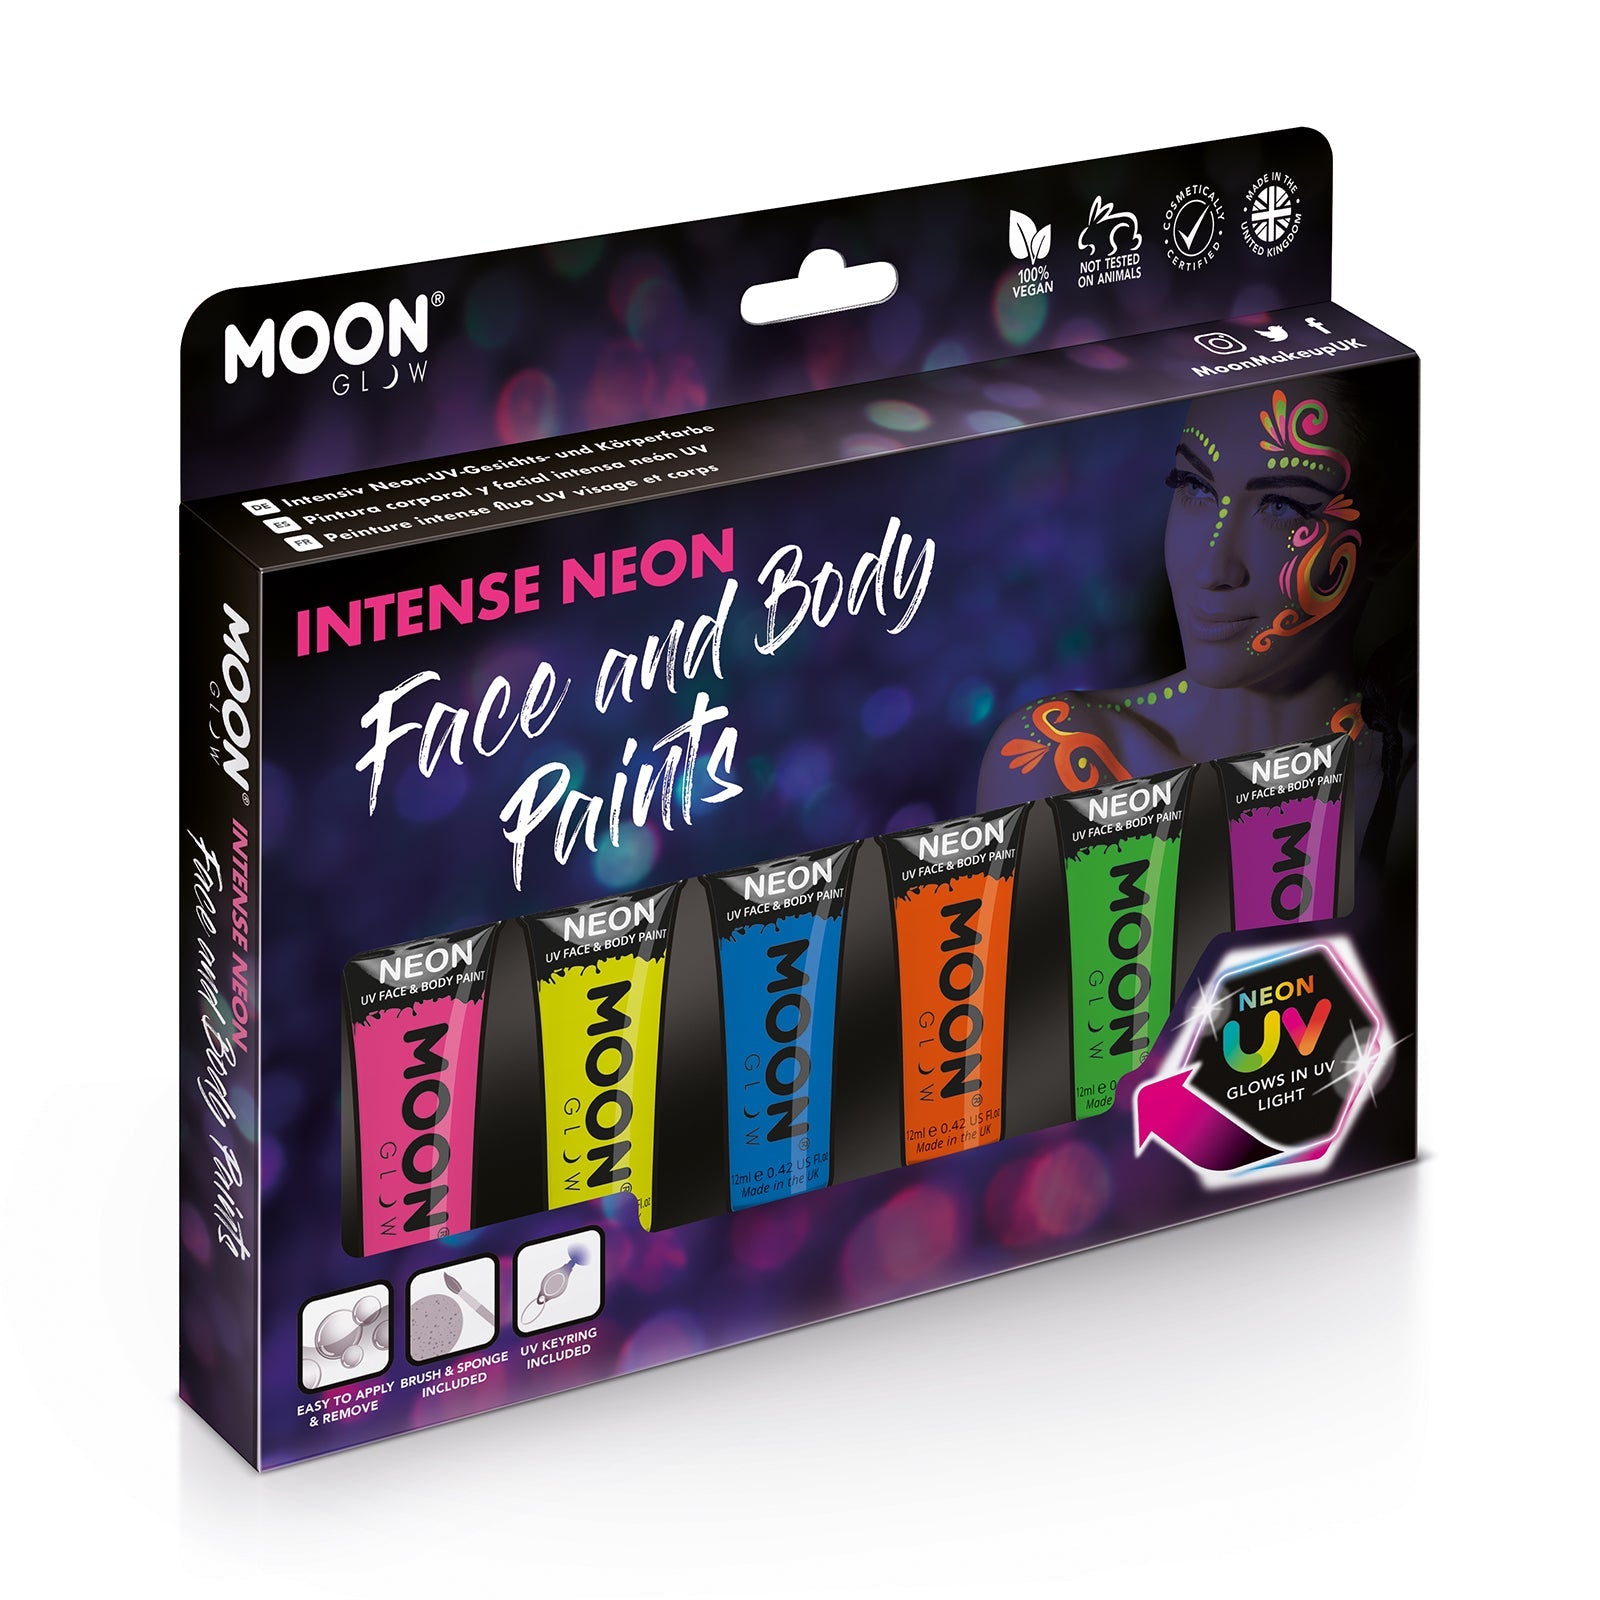 Intense Neon Face & Body Paint Makeup Boxset - 6 tubes, UV light, brush. Cosmetically certified, FDA & Health Canada compliant, cruelty free and vegan.